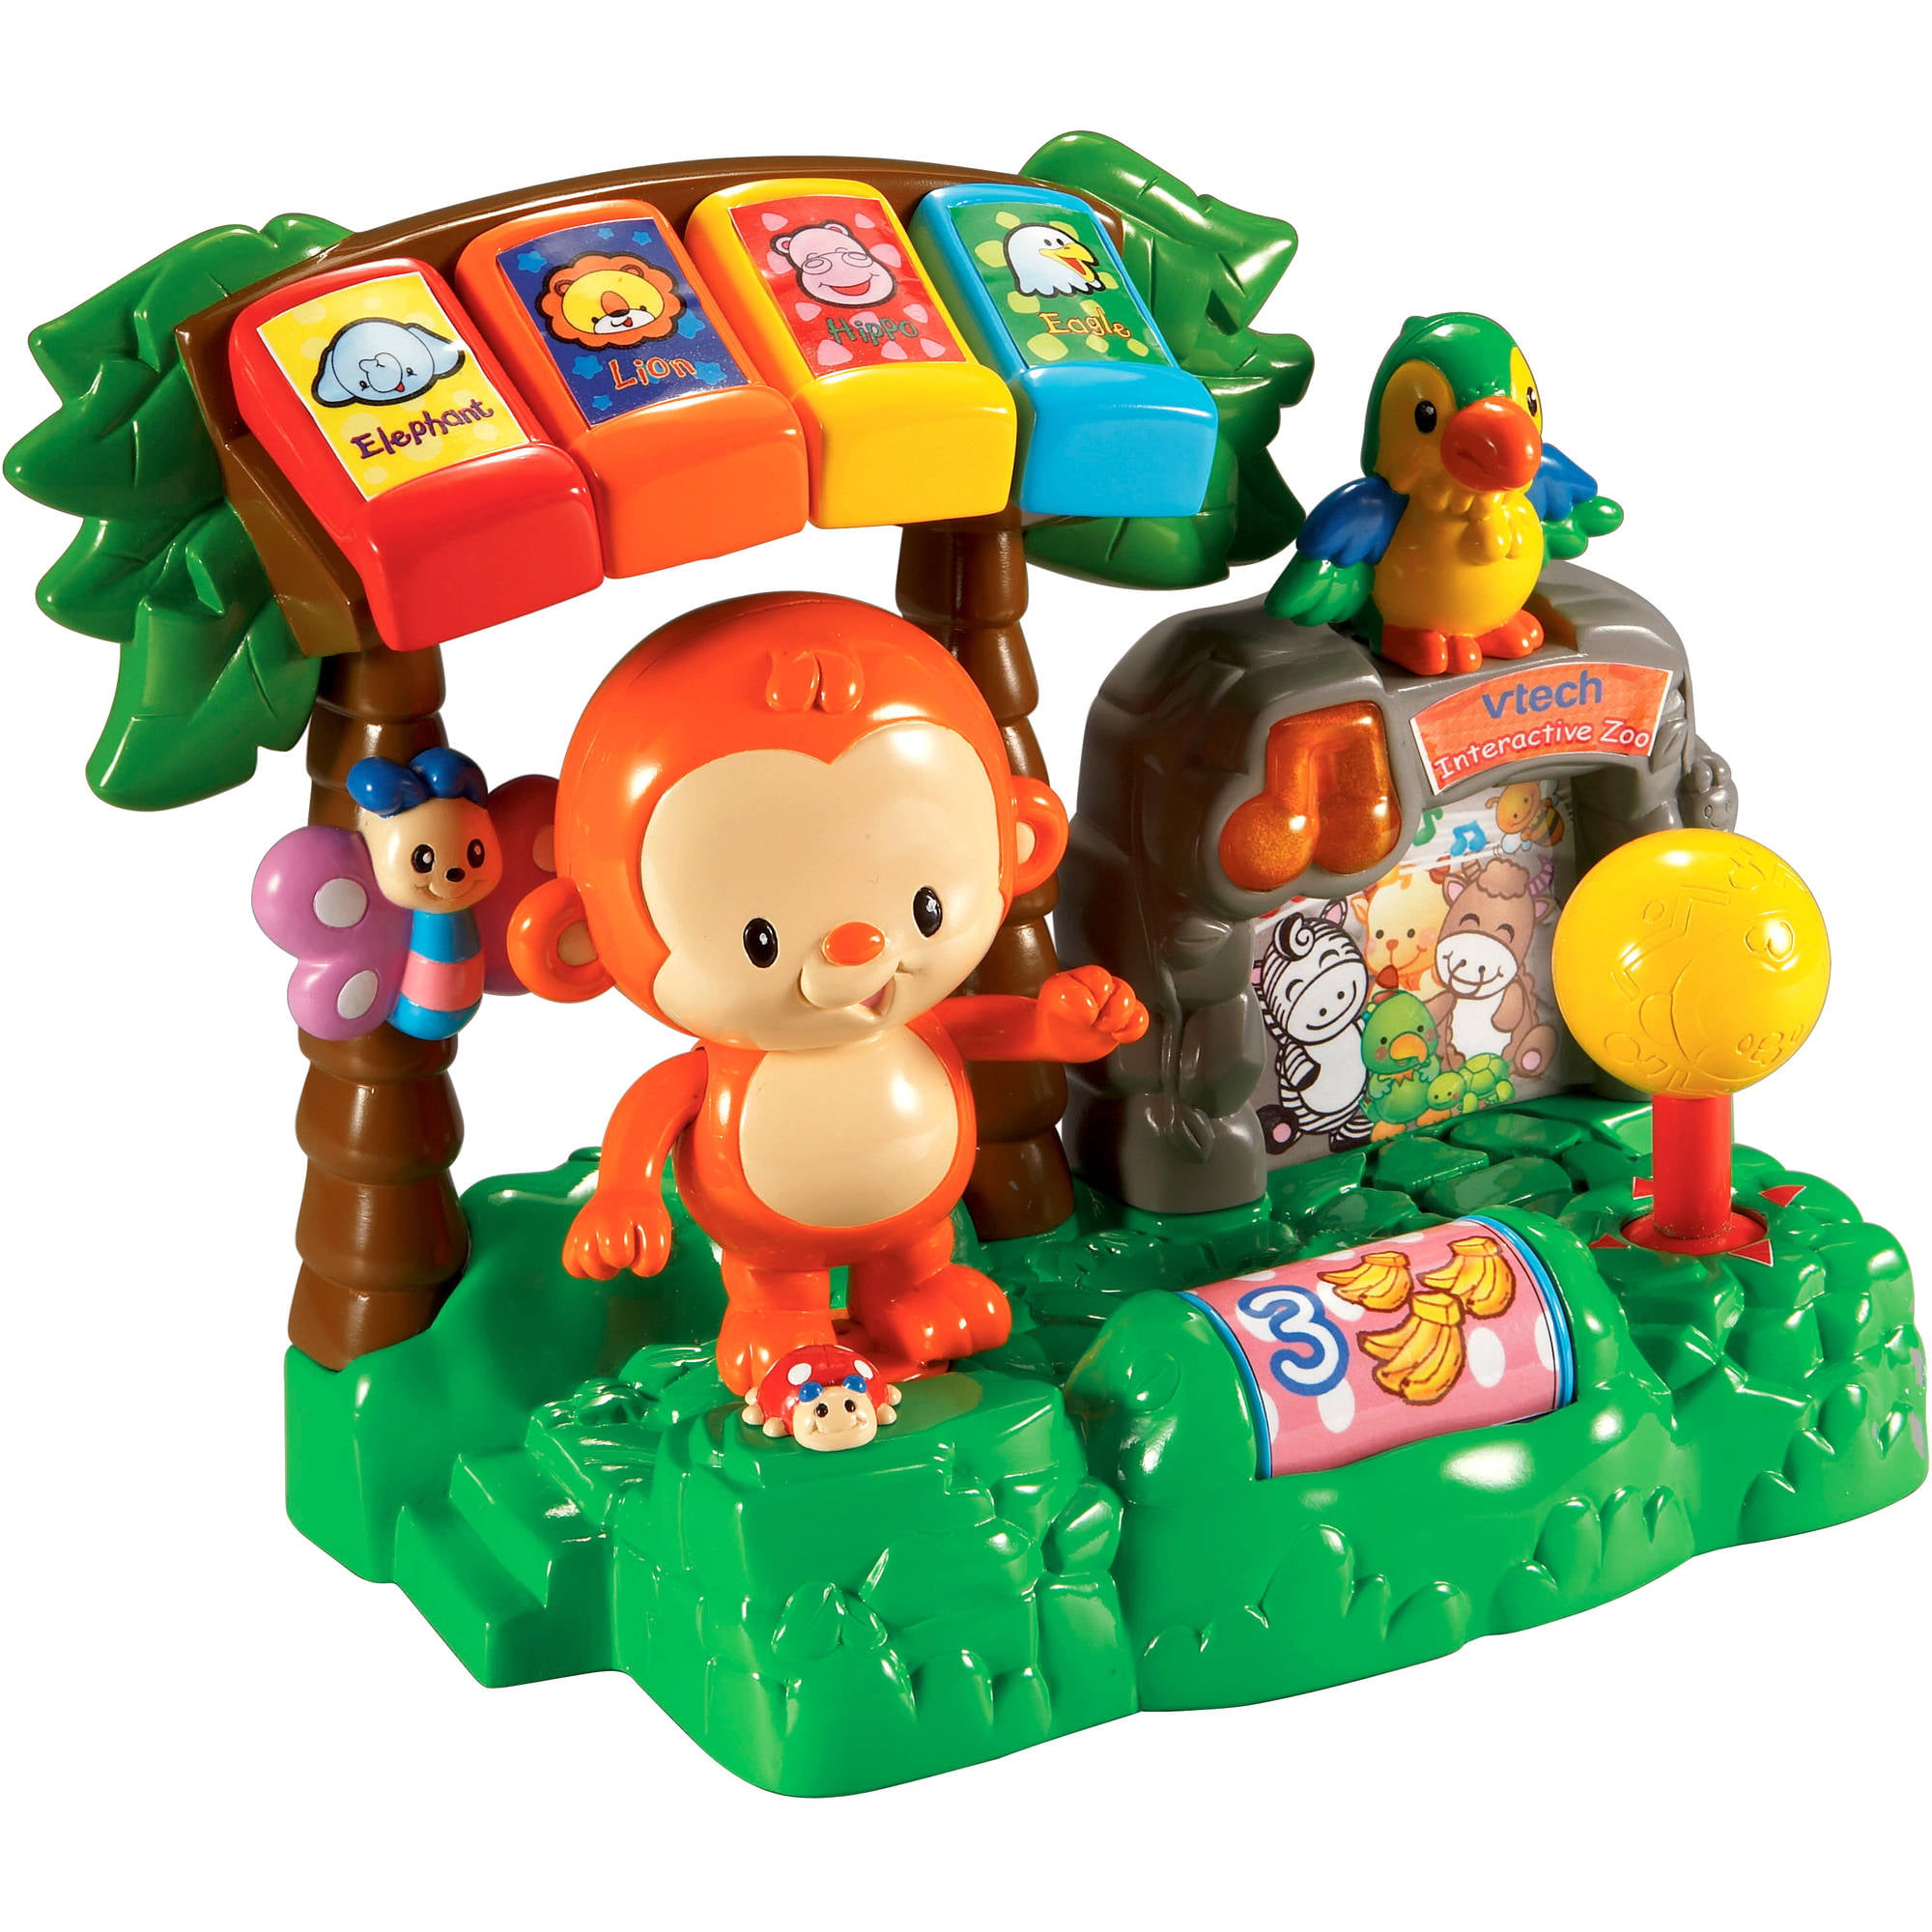 What toy stores sell VTech Canada products?